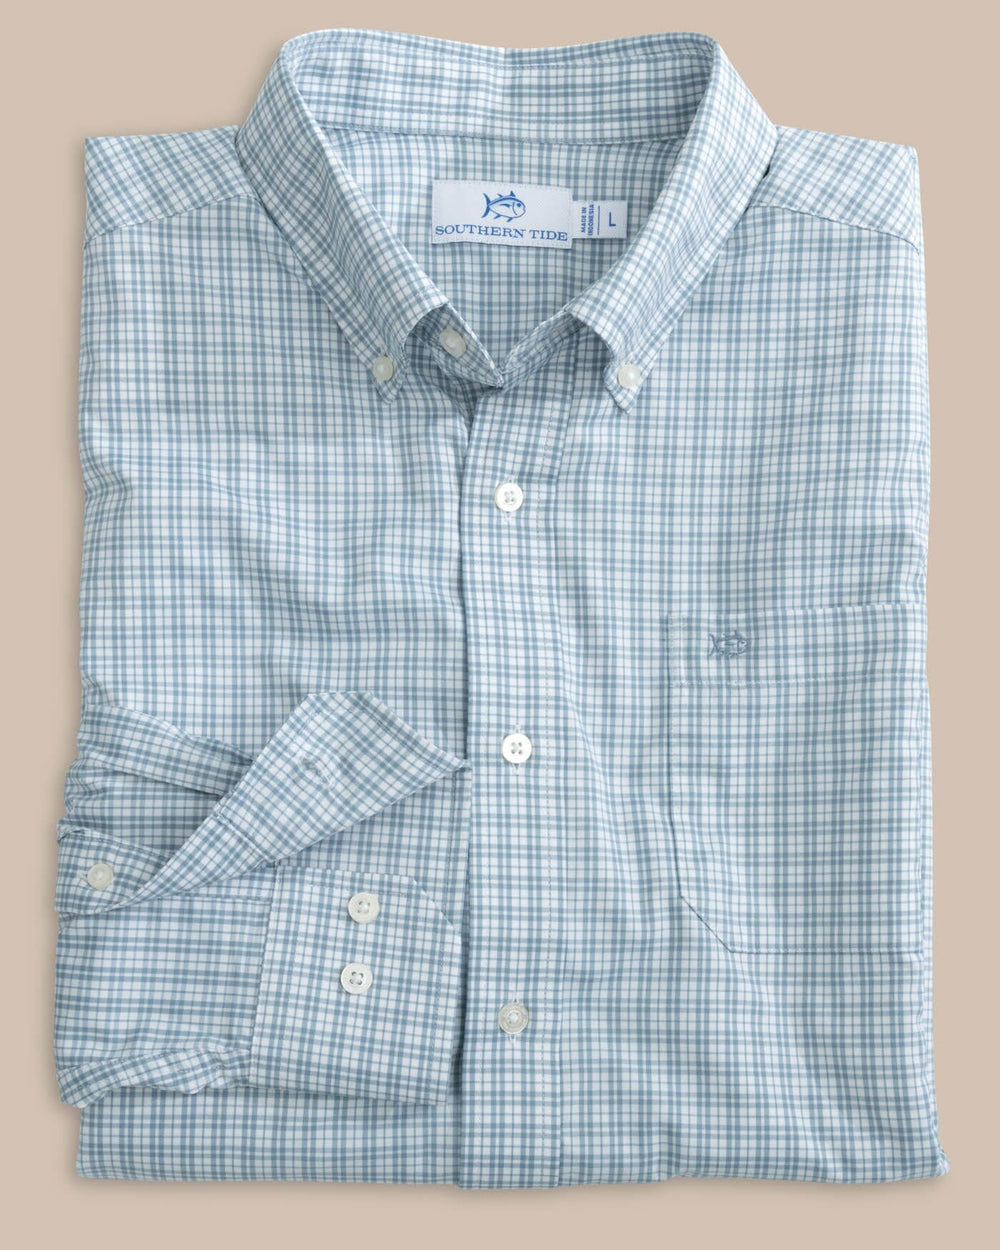 The front view of the Southern Tide brrr Intercoastal Poinsett Plaid Long Sleeve Sportshirt by Southern Tide - Windward Blue